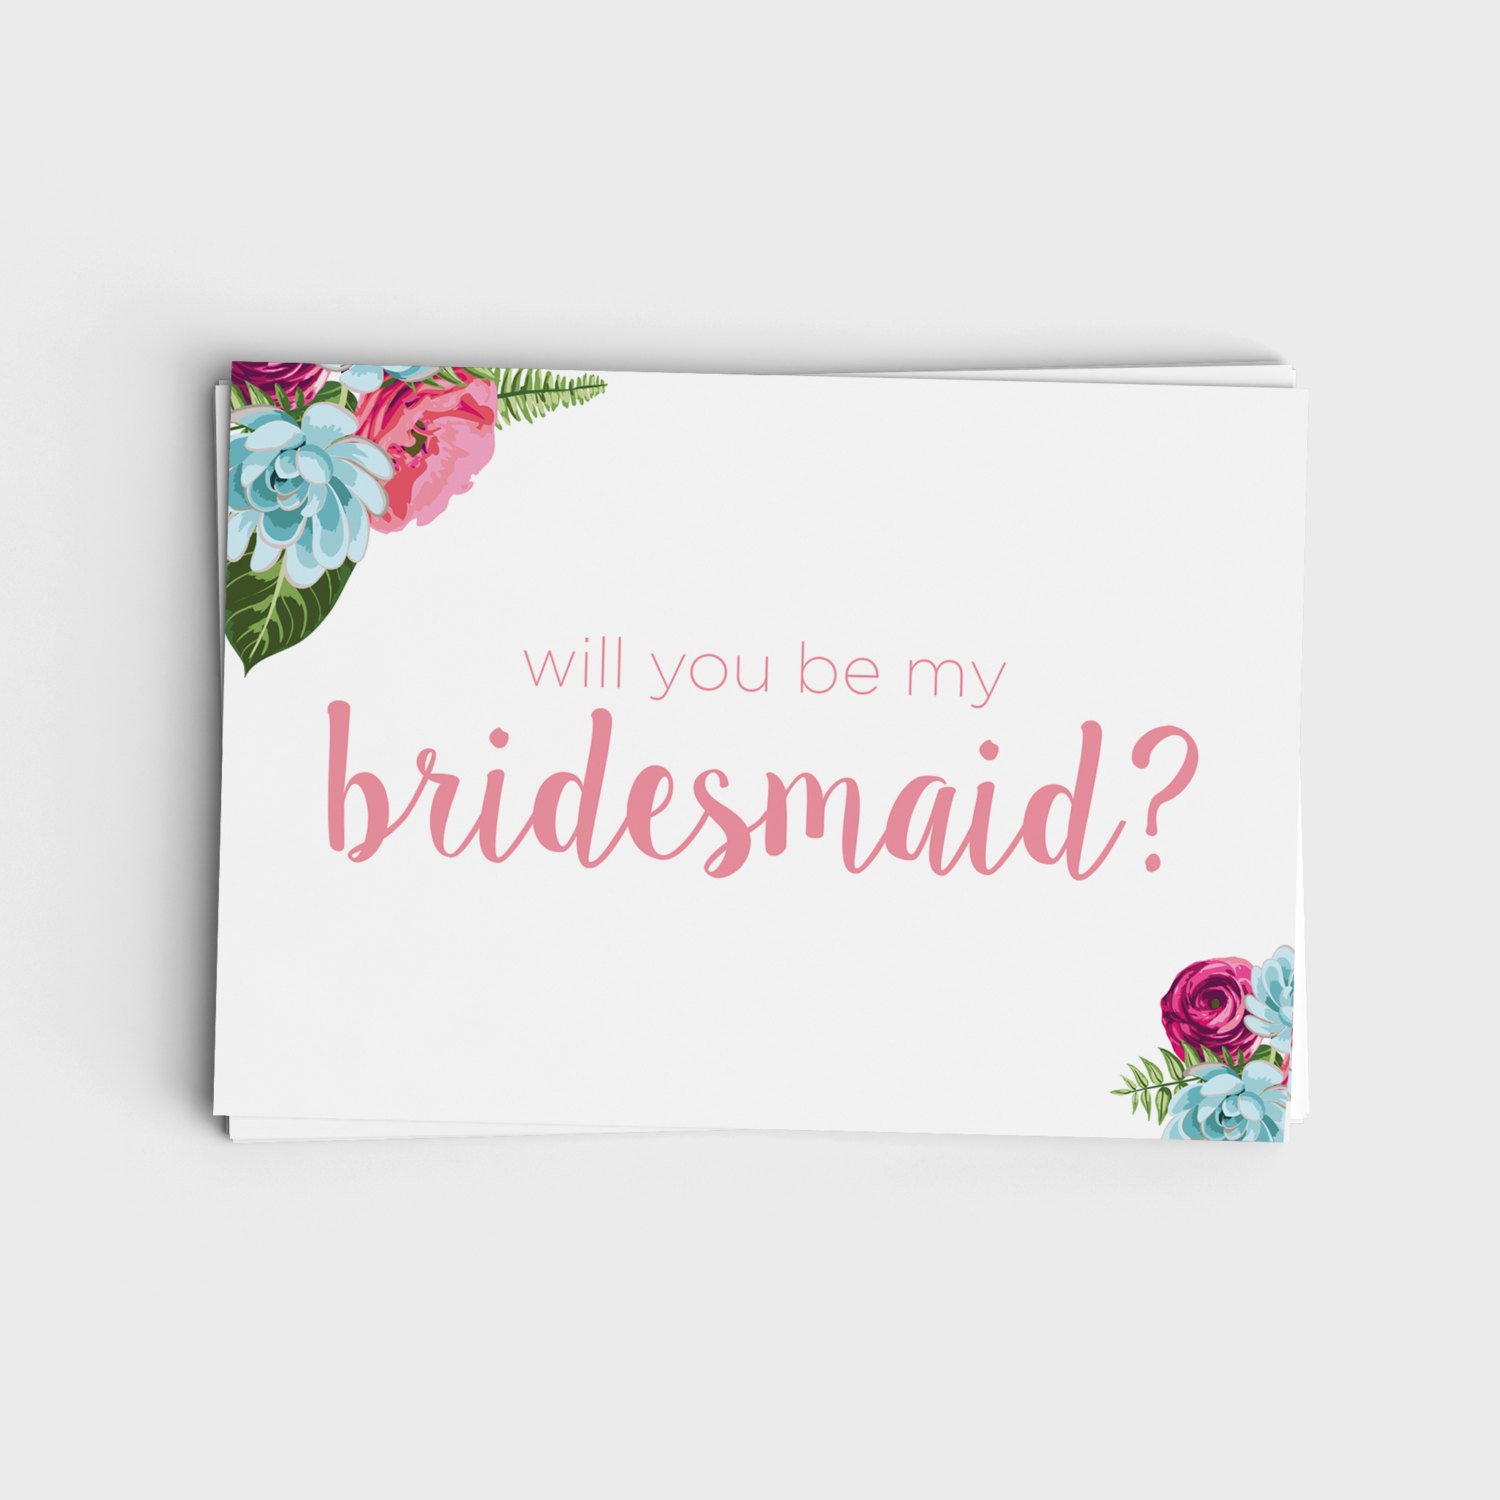 Printable Will You Be My Bridesmaid Card - Pink and Blue Floral Design